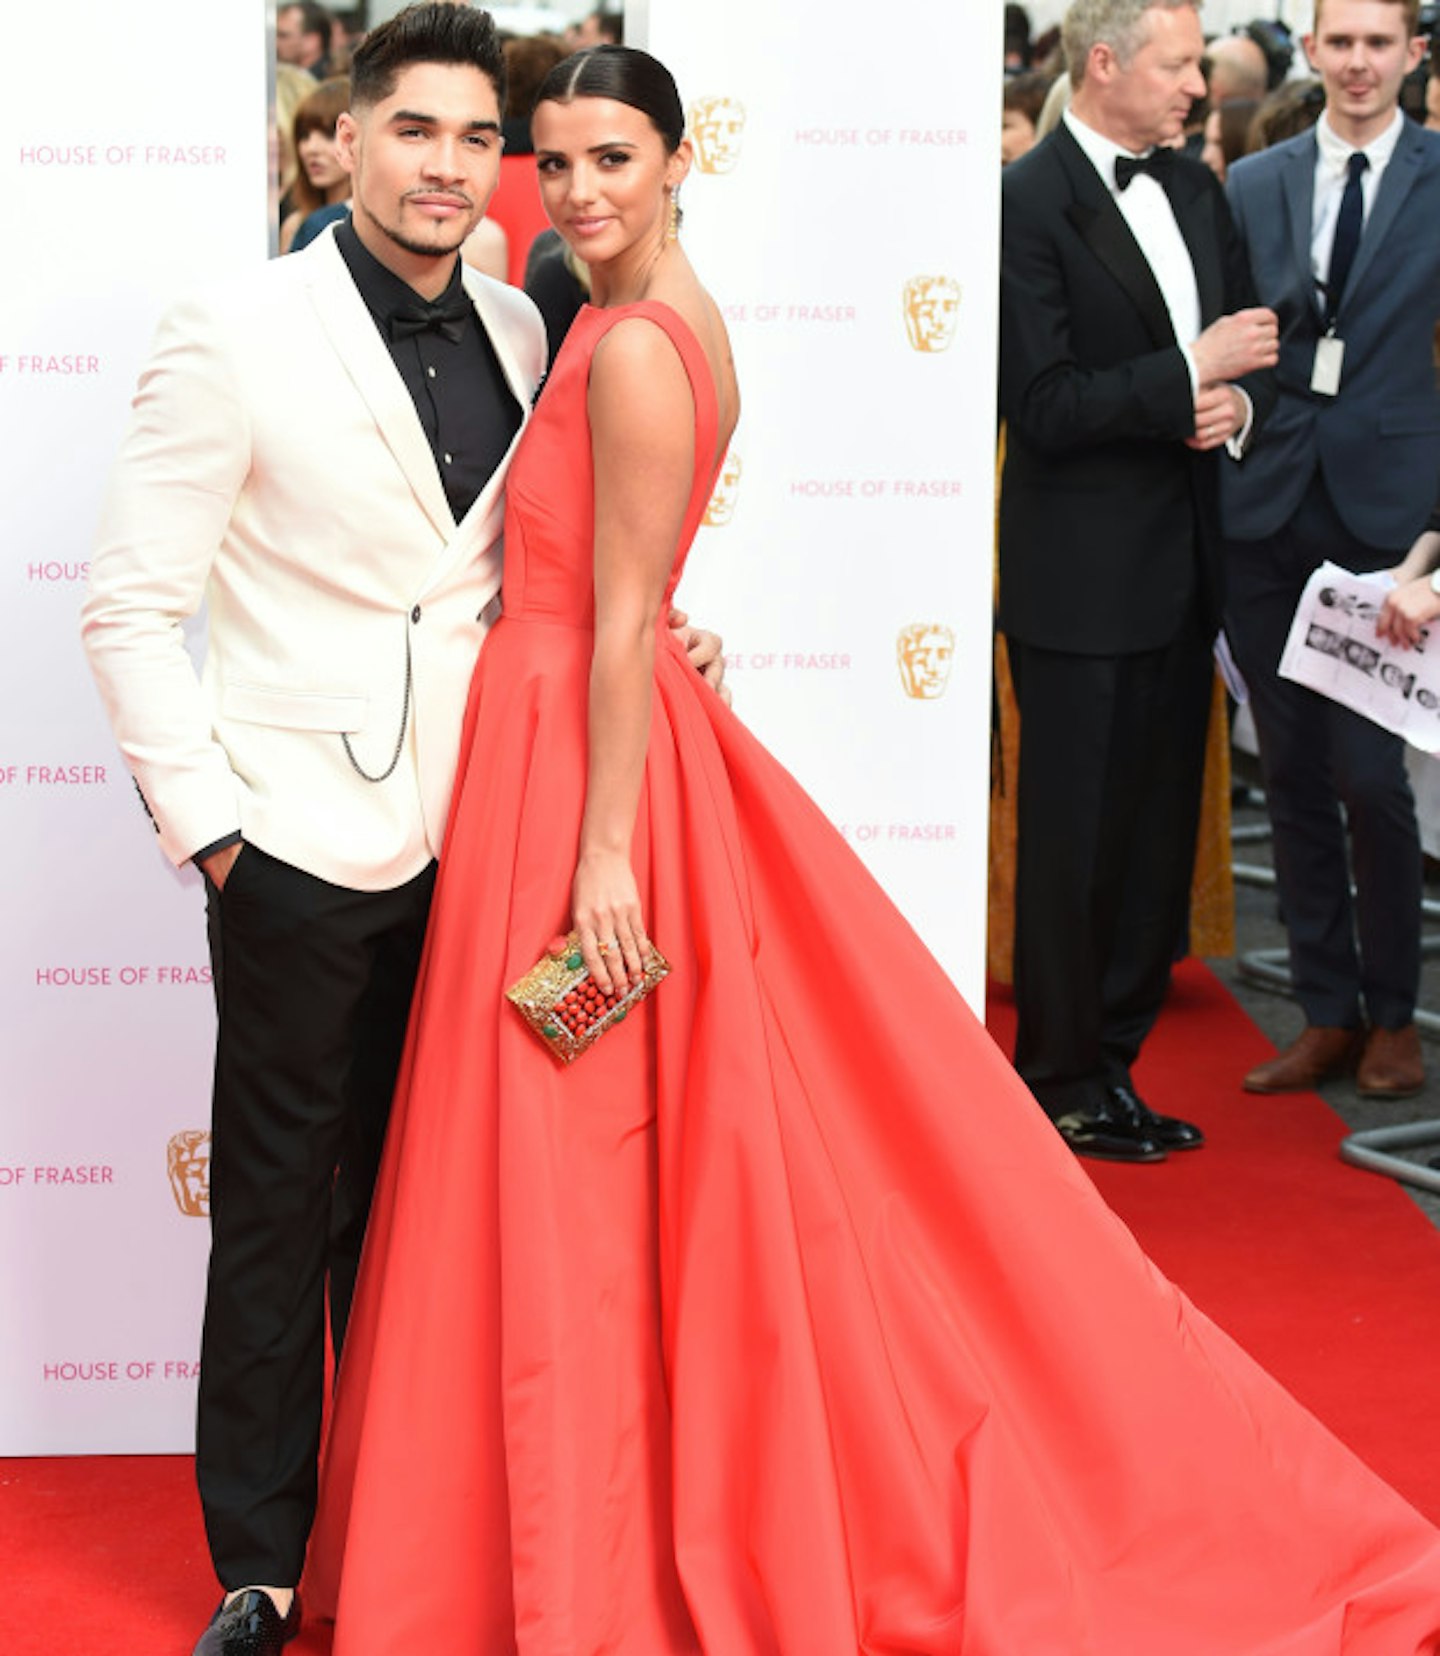 Louis and Lucy at the BAFTAs